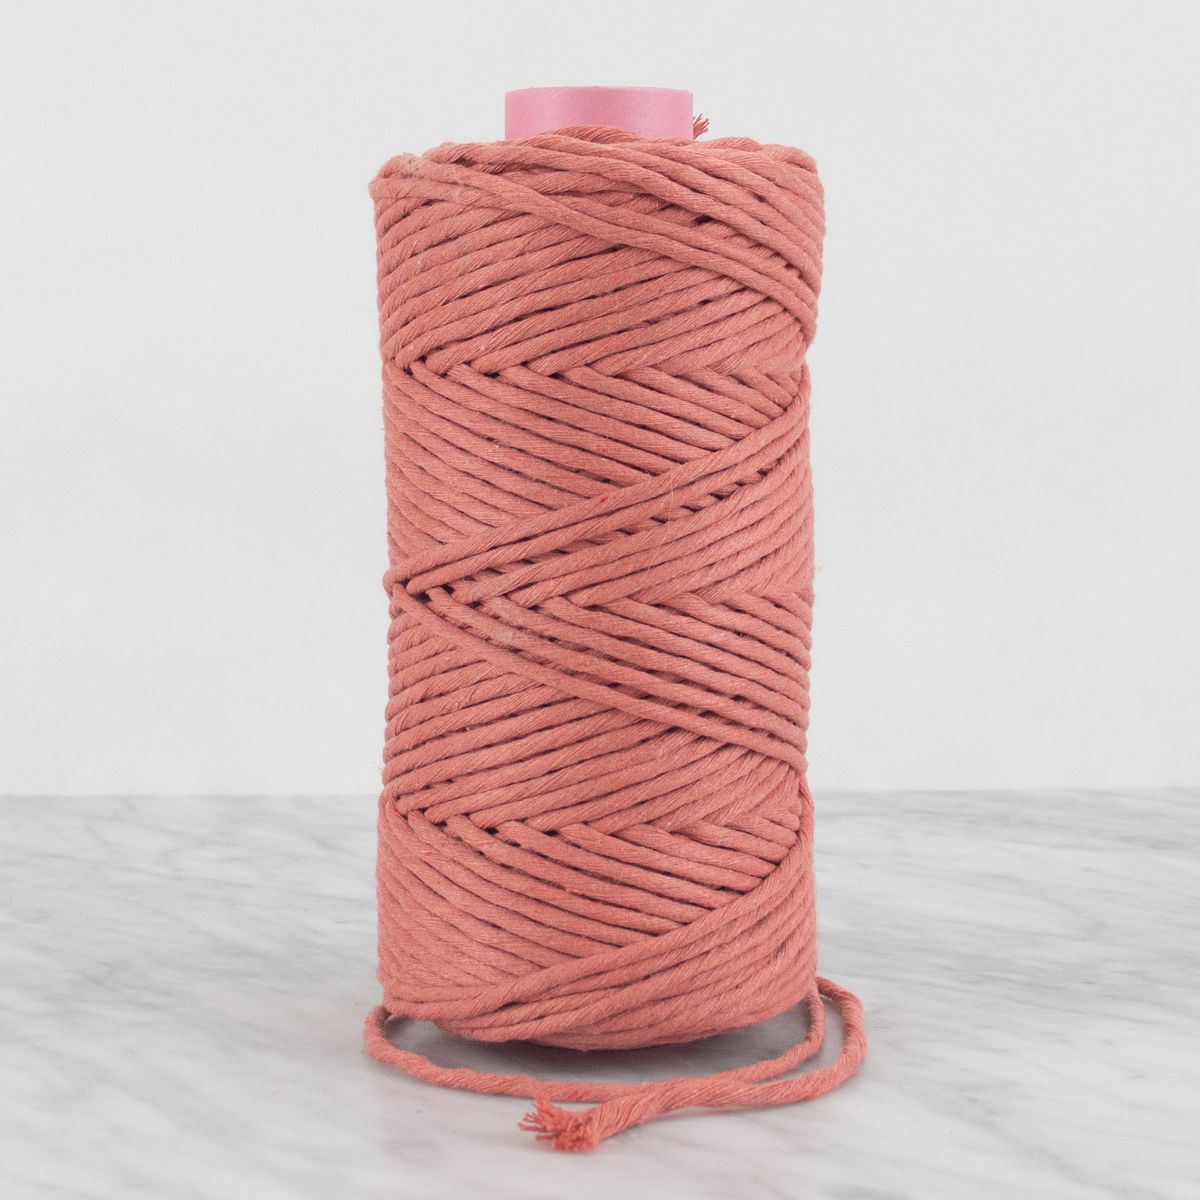 5mm Recycled Cotton String 0.5 kg - Peach